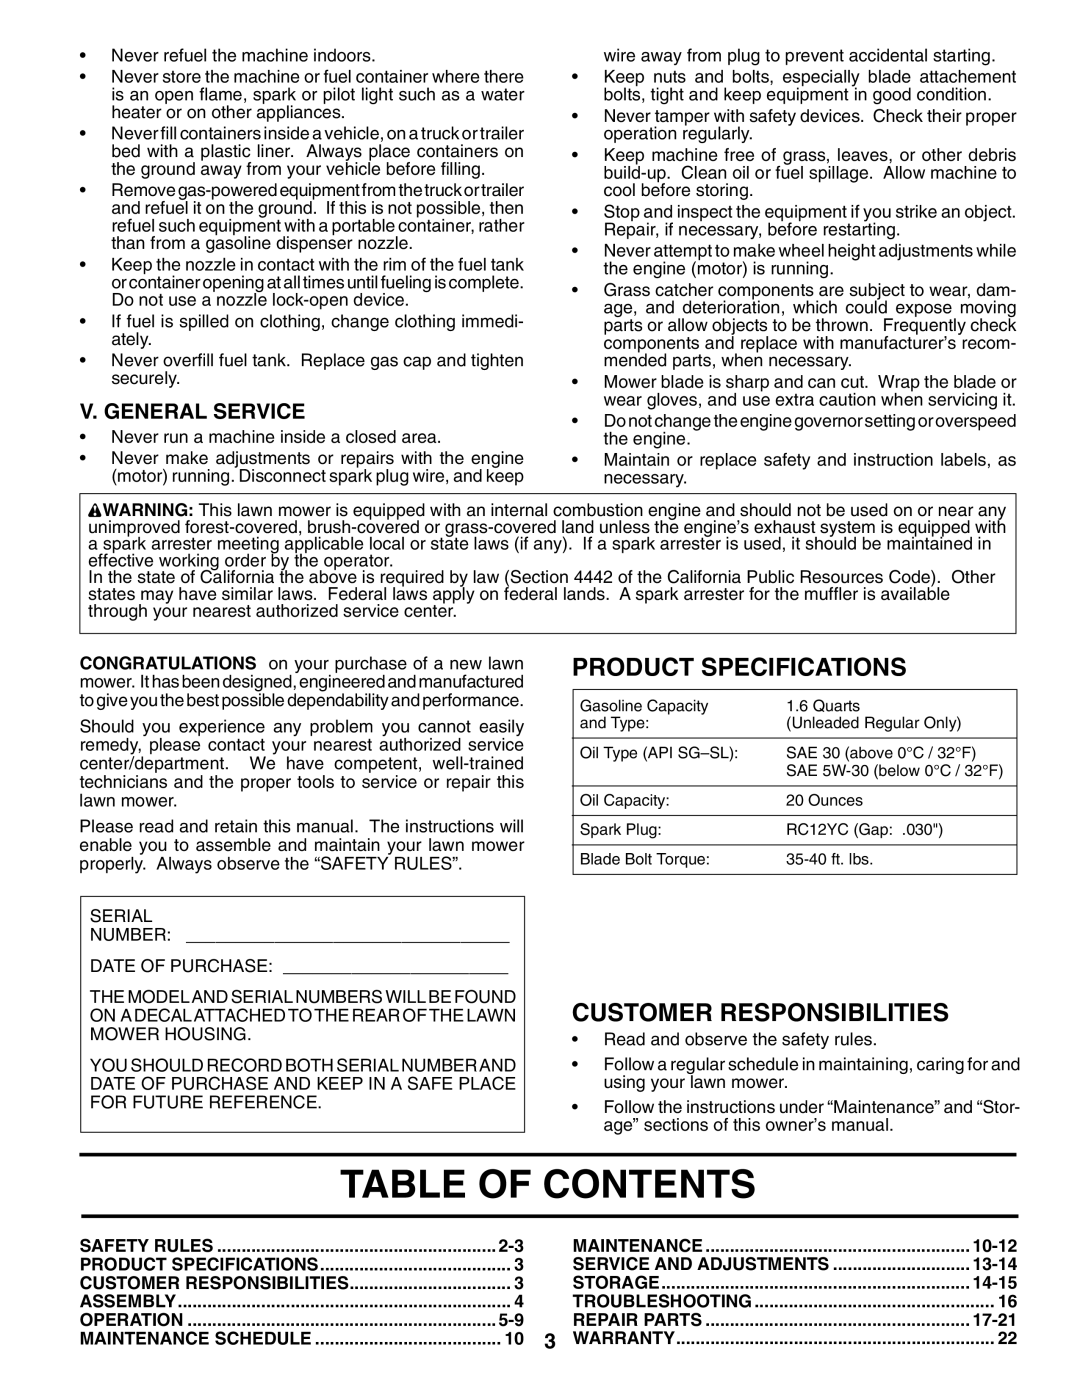 Husqvarna 70R21HV owner manual Table Of Contents, Product Specifications, Customer Responsibilities, V. General Service 